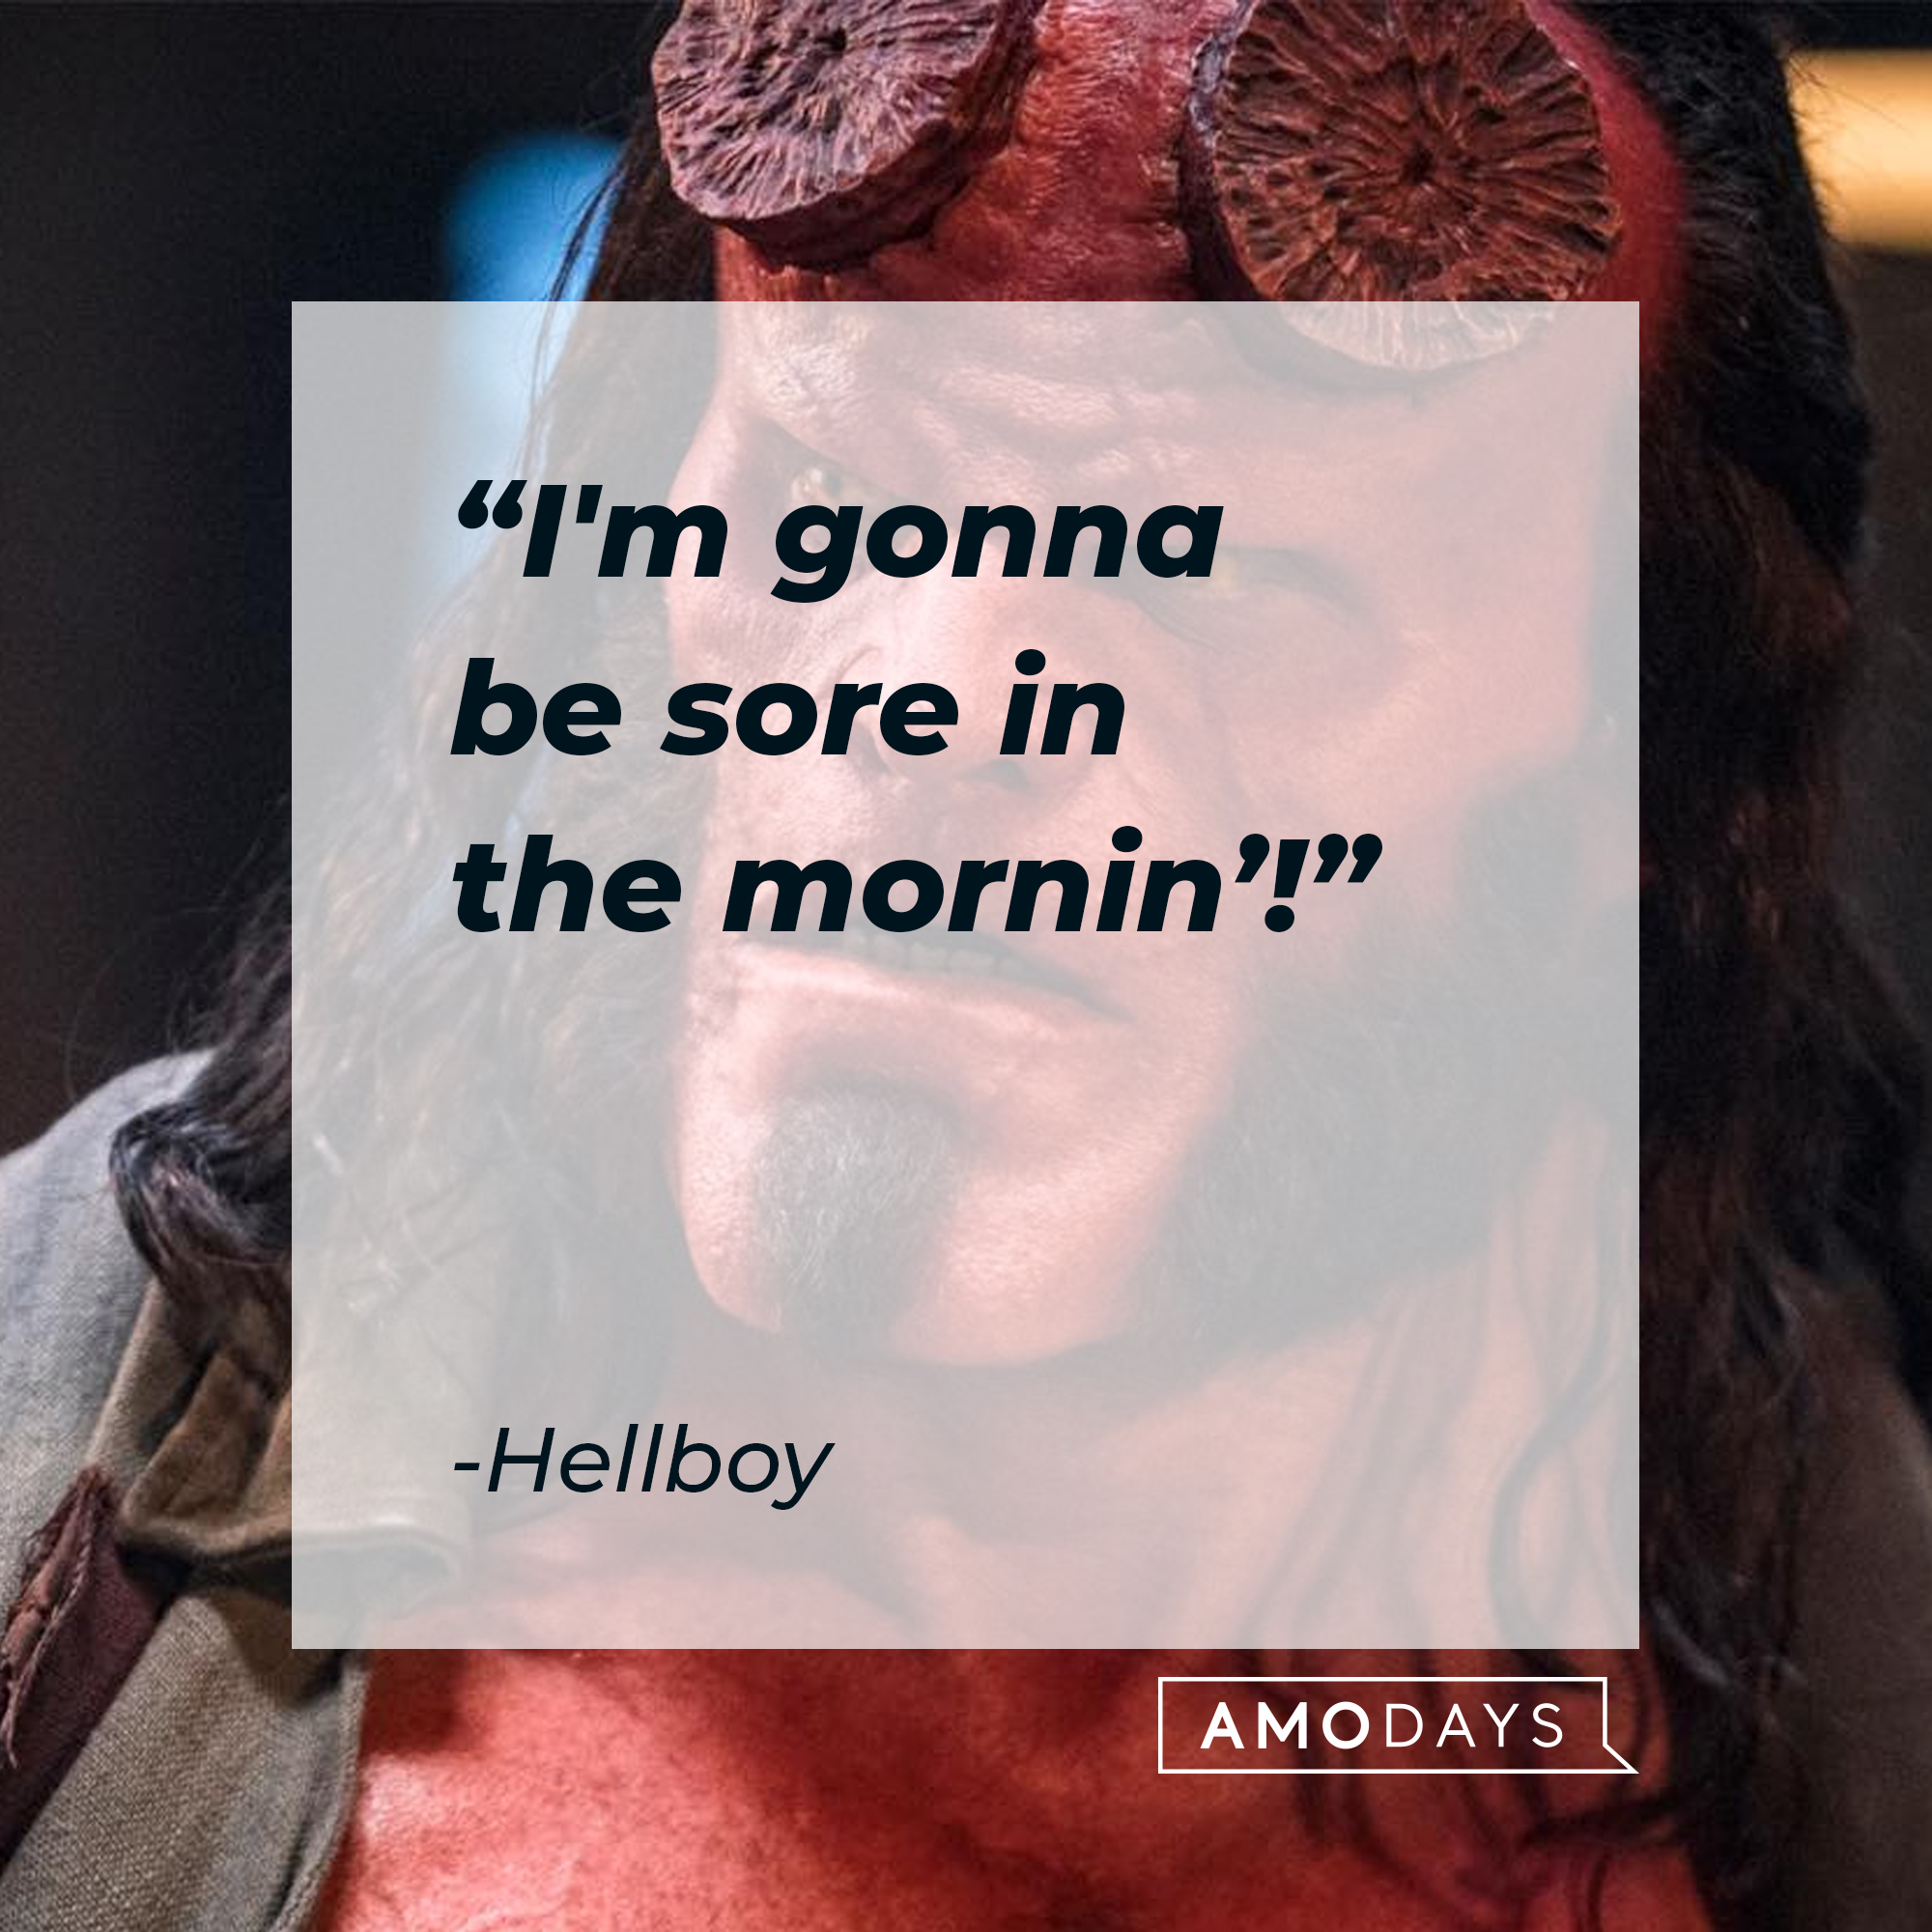 Hellboy's quote: "I'm gonna be sore in the mornin'!" | Source: facebook.com/hellboymovie